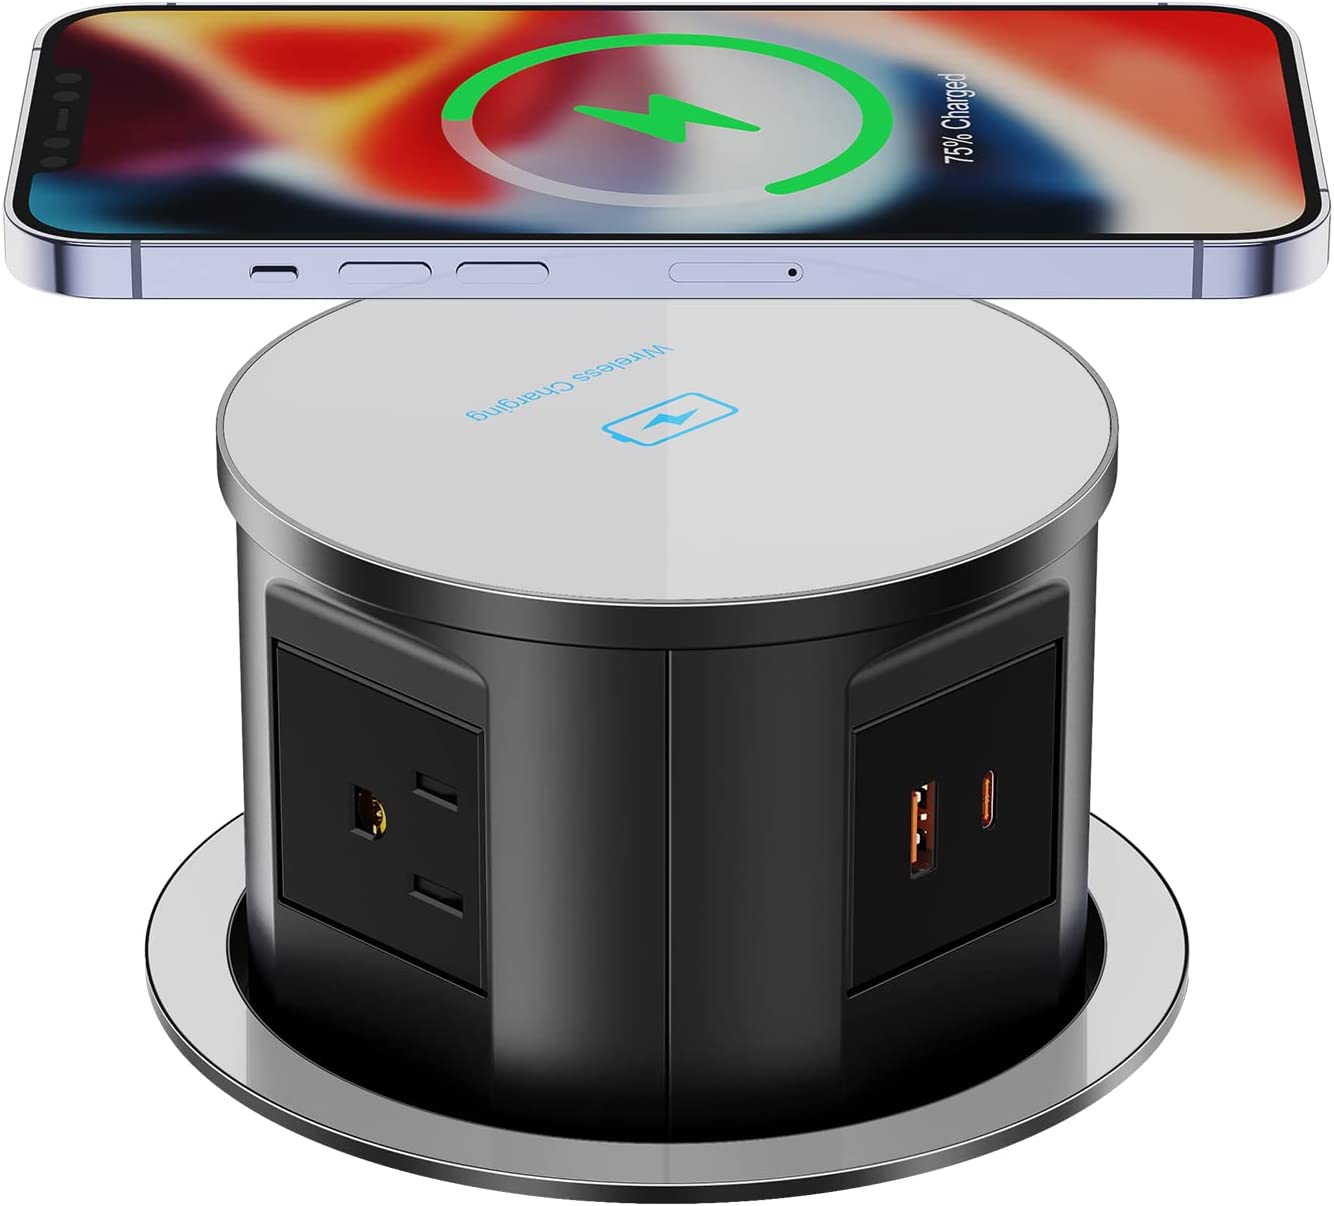 Automatic Pop Up Socket, Pop Up Power Outlet with Wireless Charger, Pulling Pop